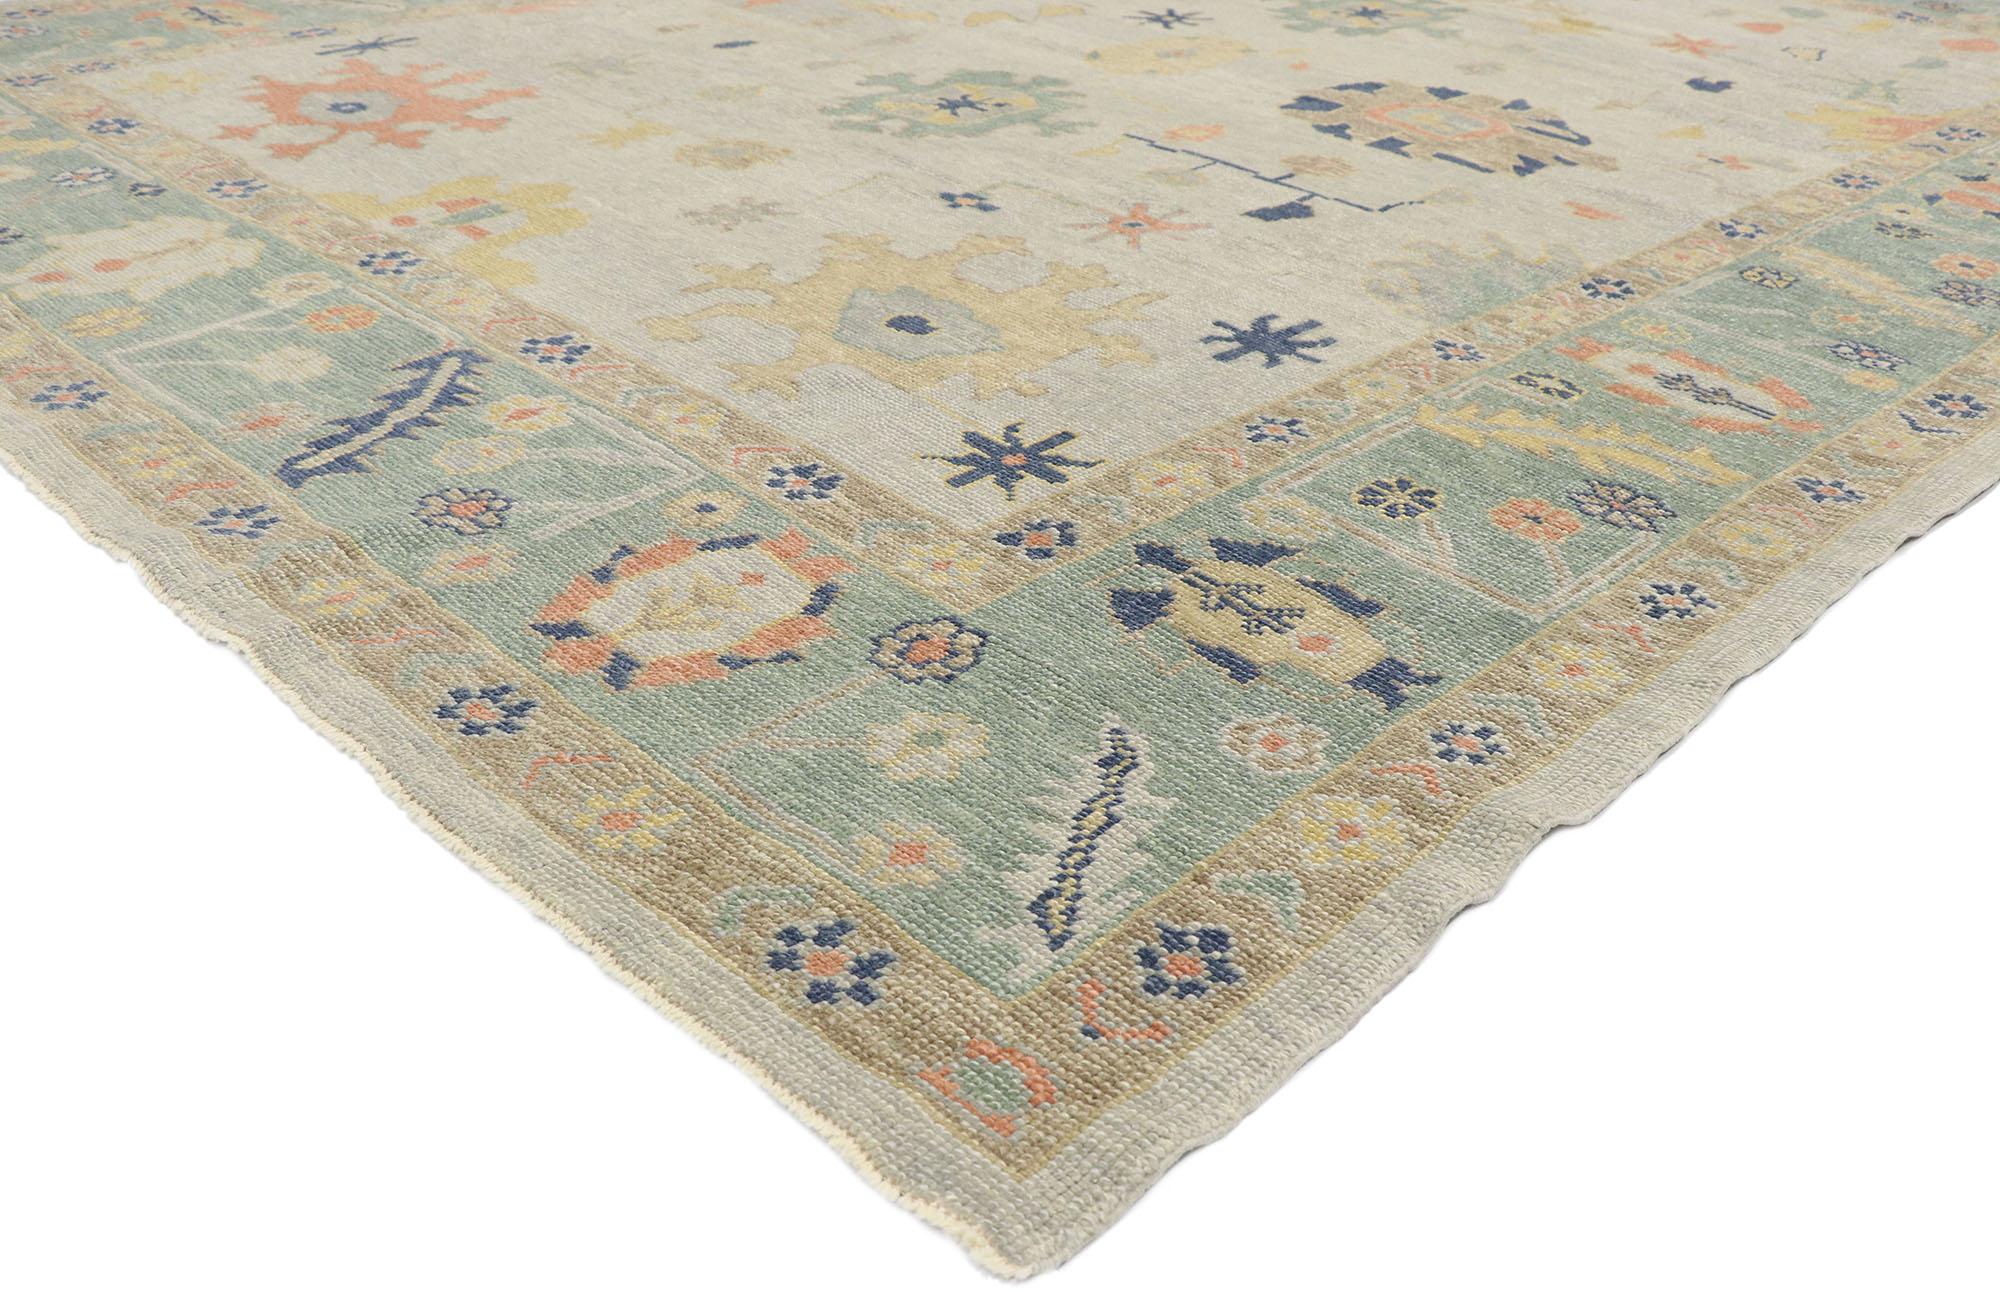 53504, new contemporary Turkish Oushak rug with Modern Coastal style. This hand-knotted wool contemporary Turkish Oushak rug features an all-over botanical pattern spread across an abrashed light gray field. An array of botanical motifs decorates